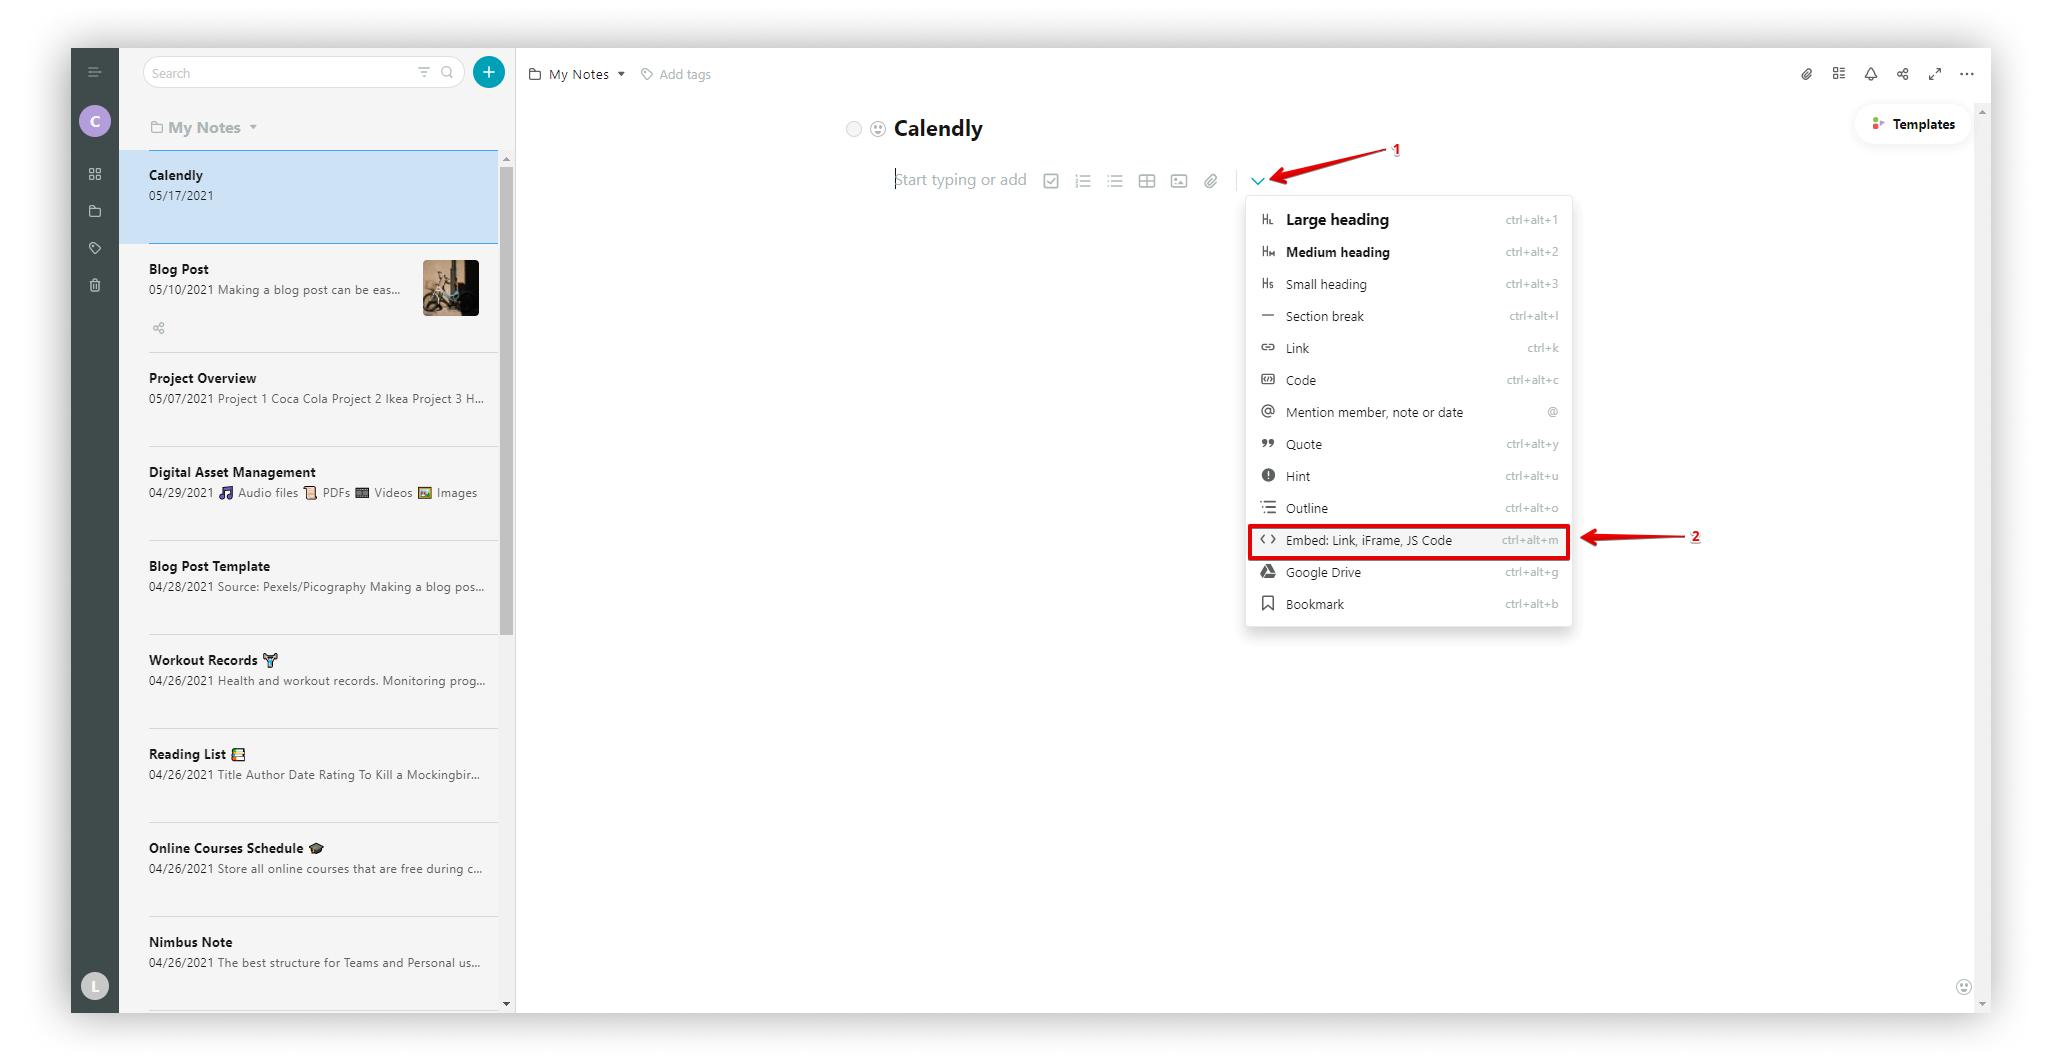 Adding Calendly embed to Nimbus Note